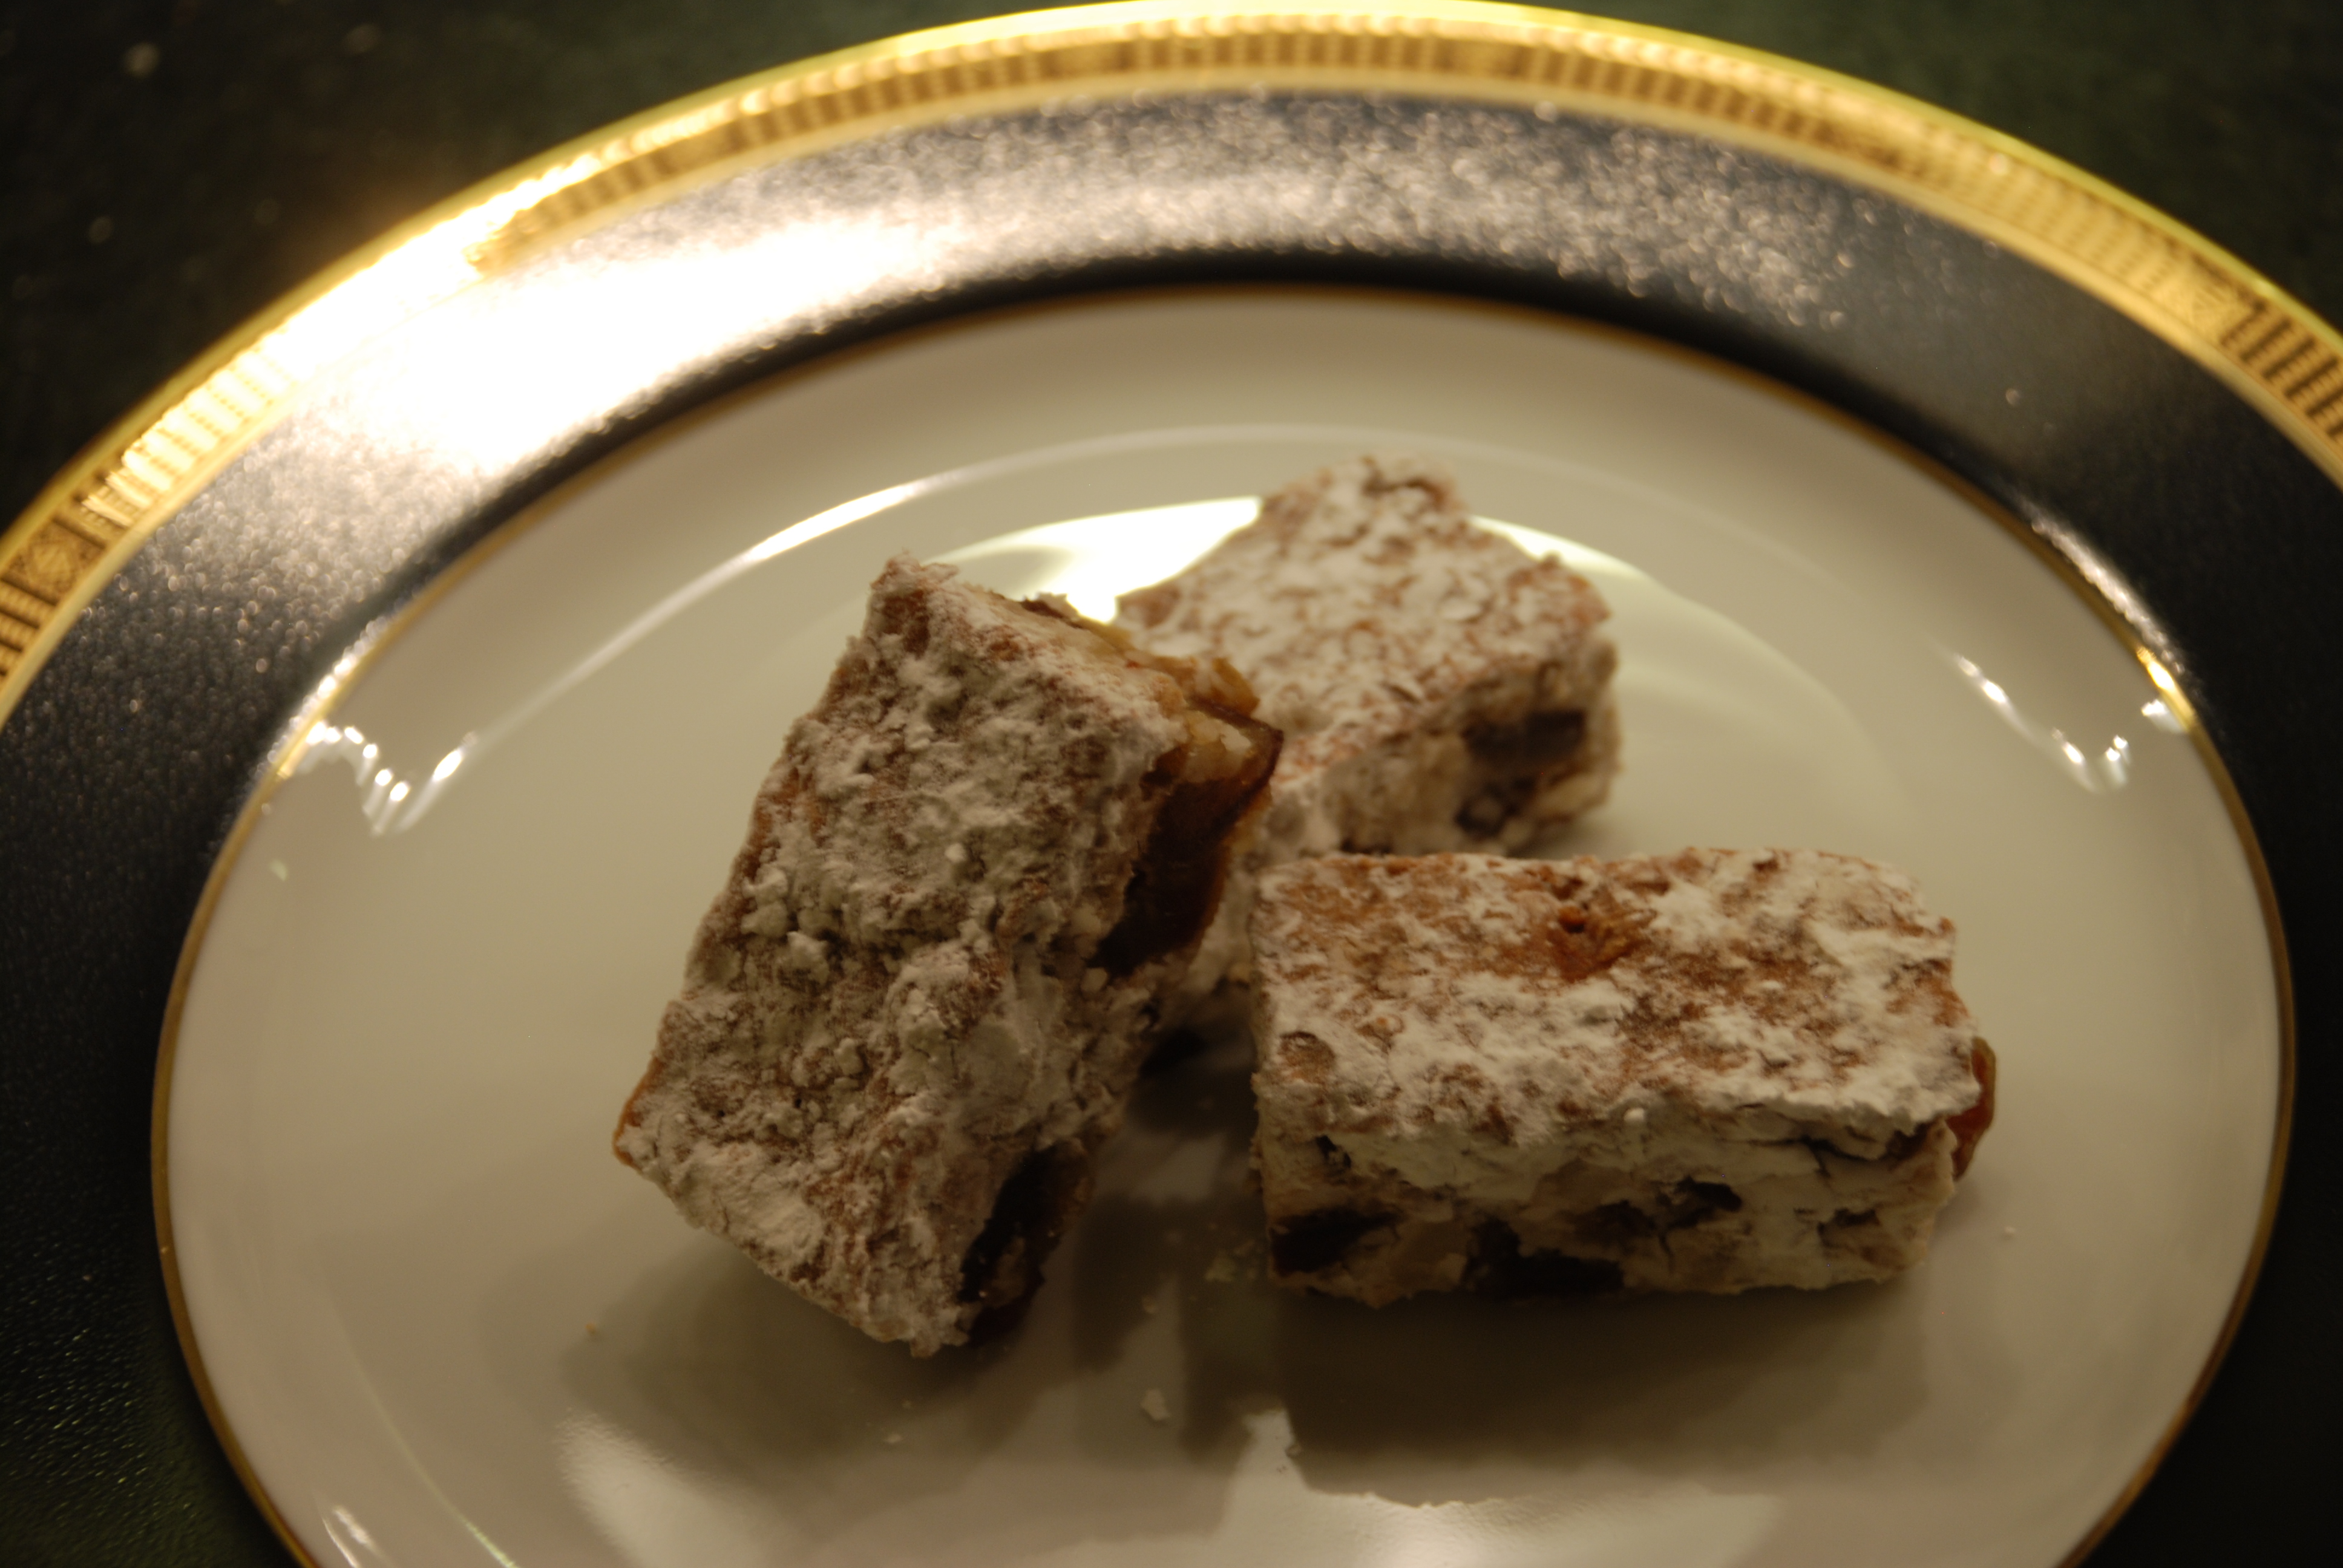 Date bars on a holiday plate.